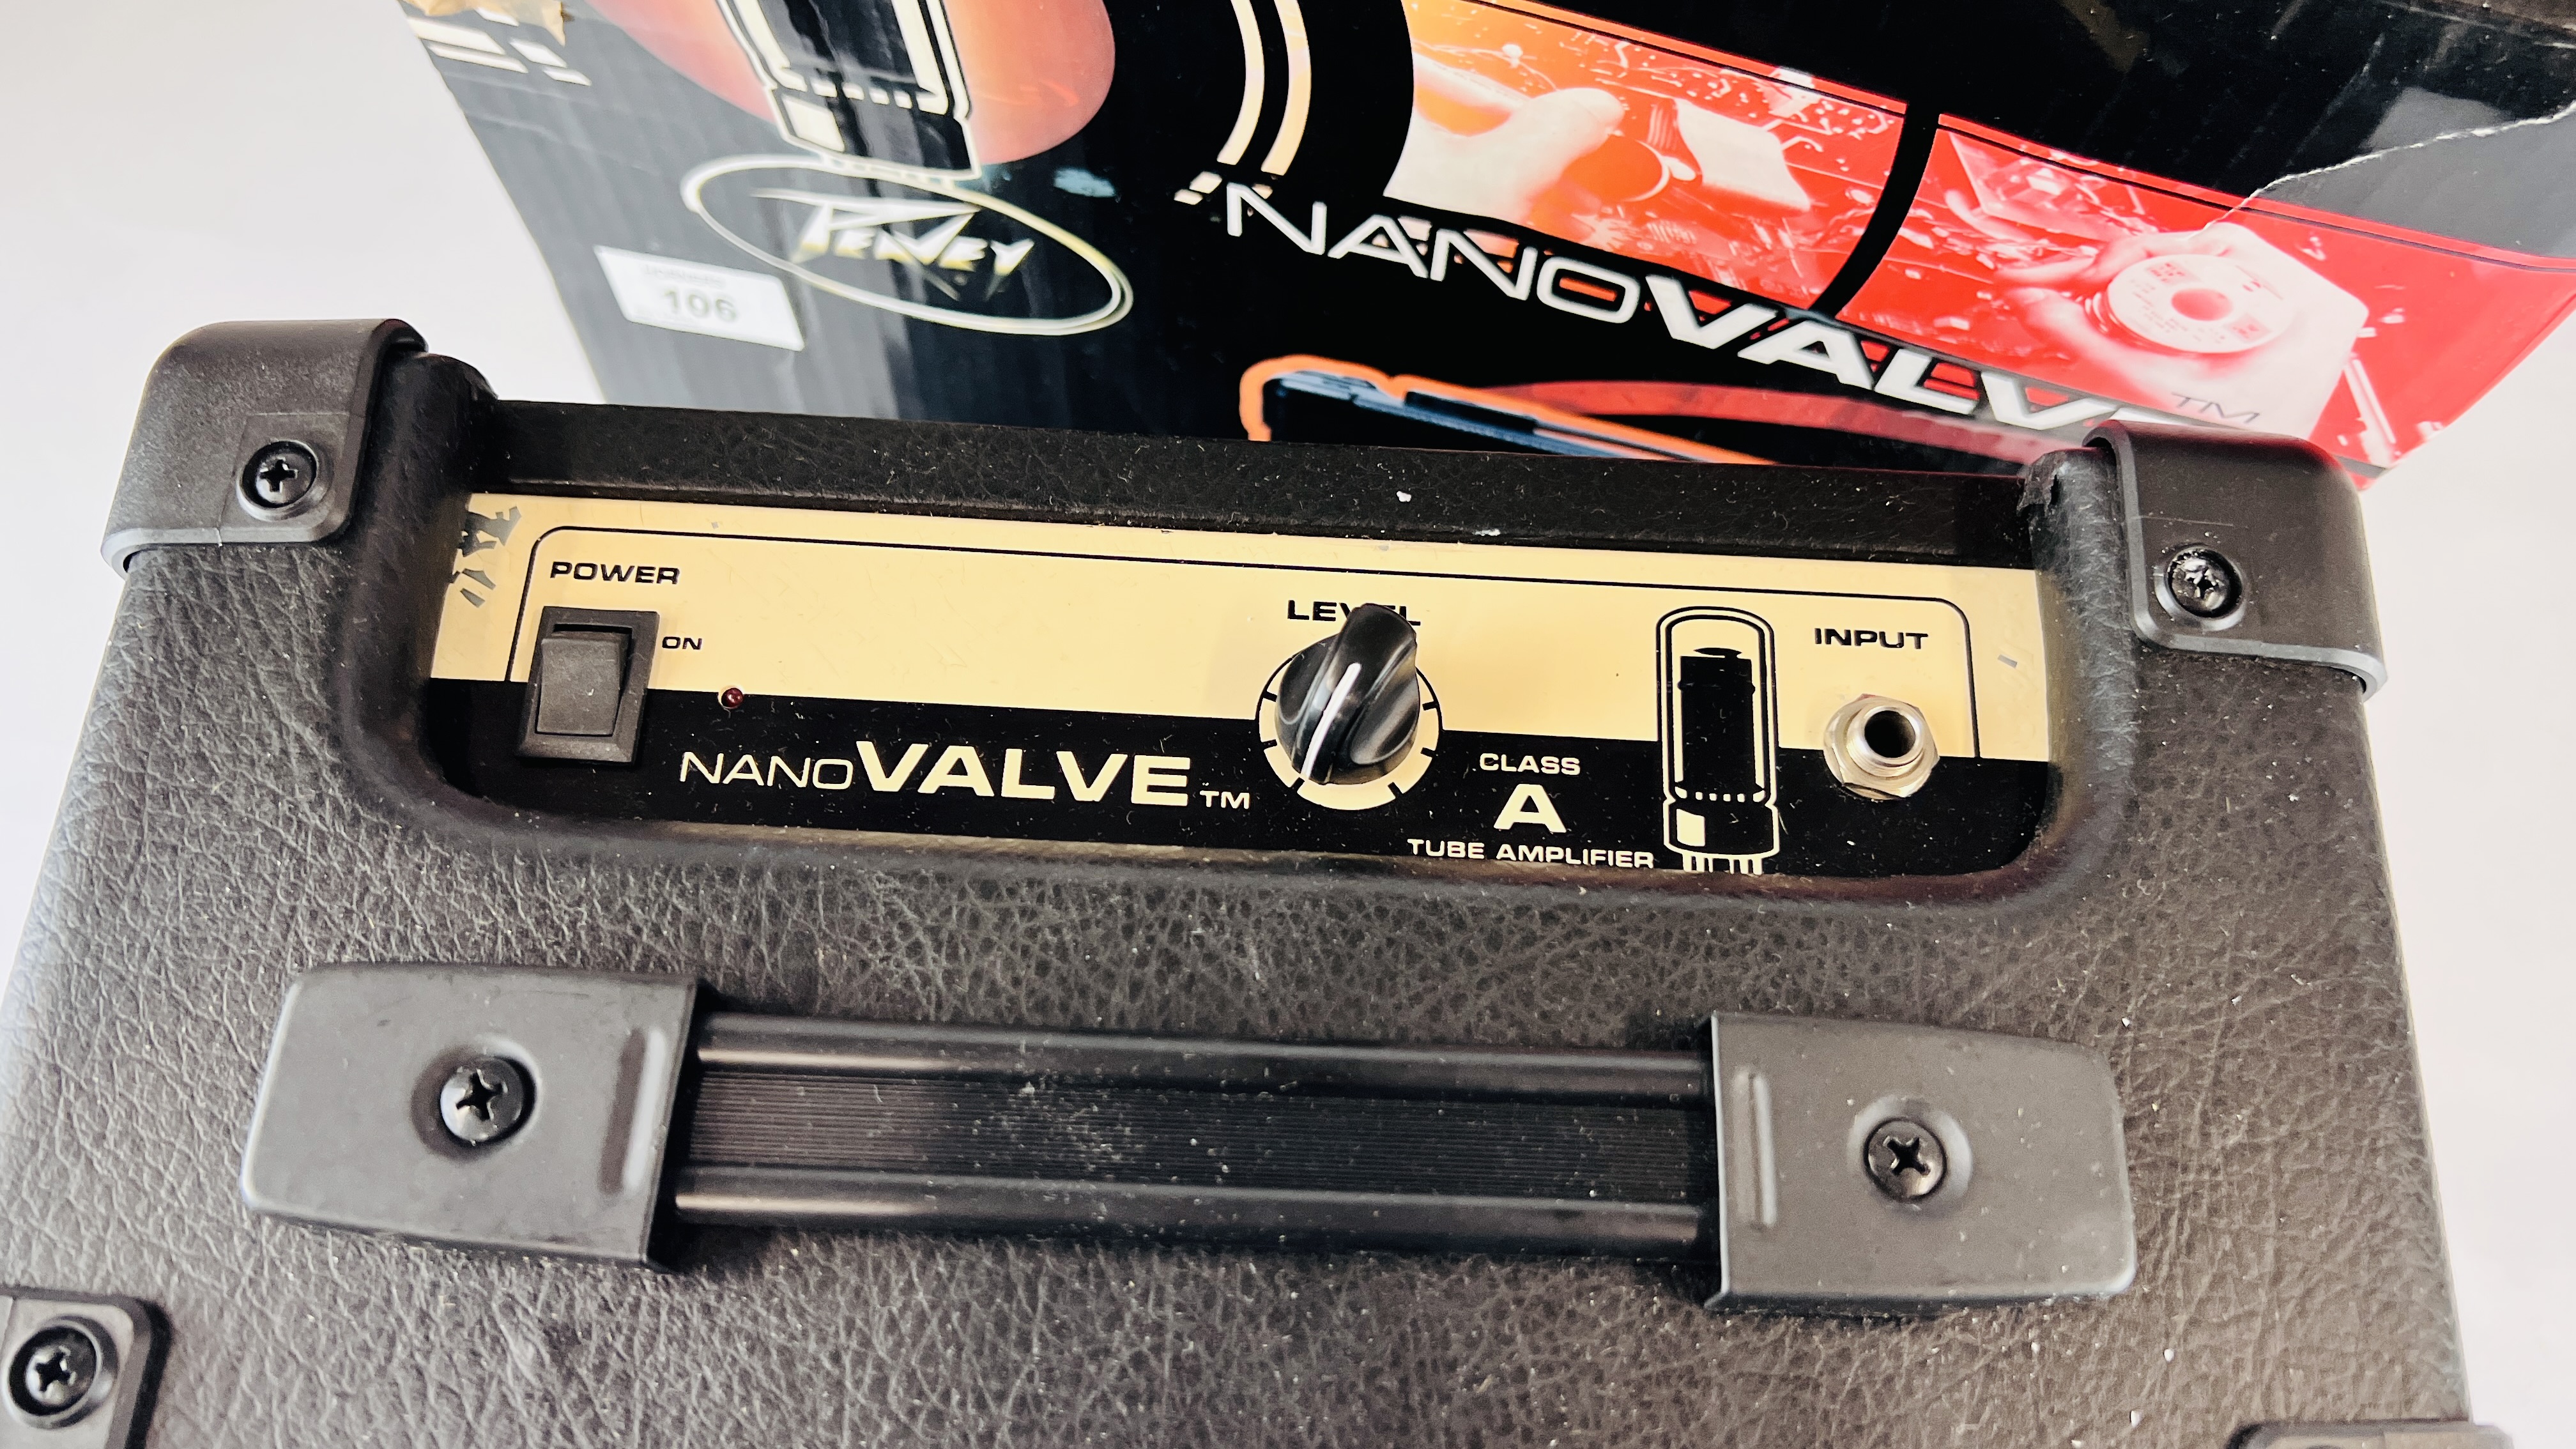 BOXED NANO VALVE PEAVEY PRACTICE AMP - SOLD AS SEEN. - Image 3 of 4